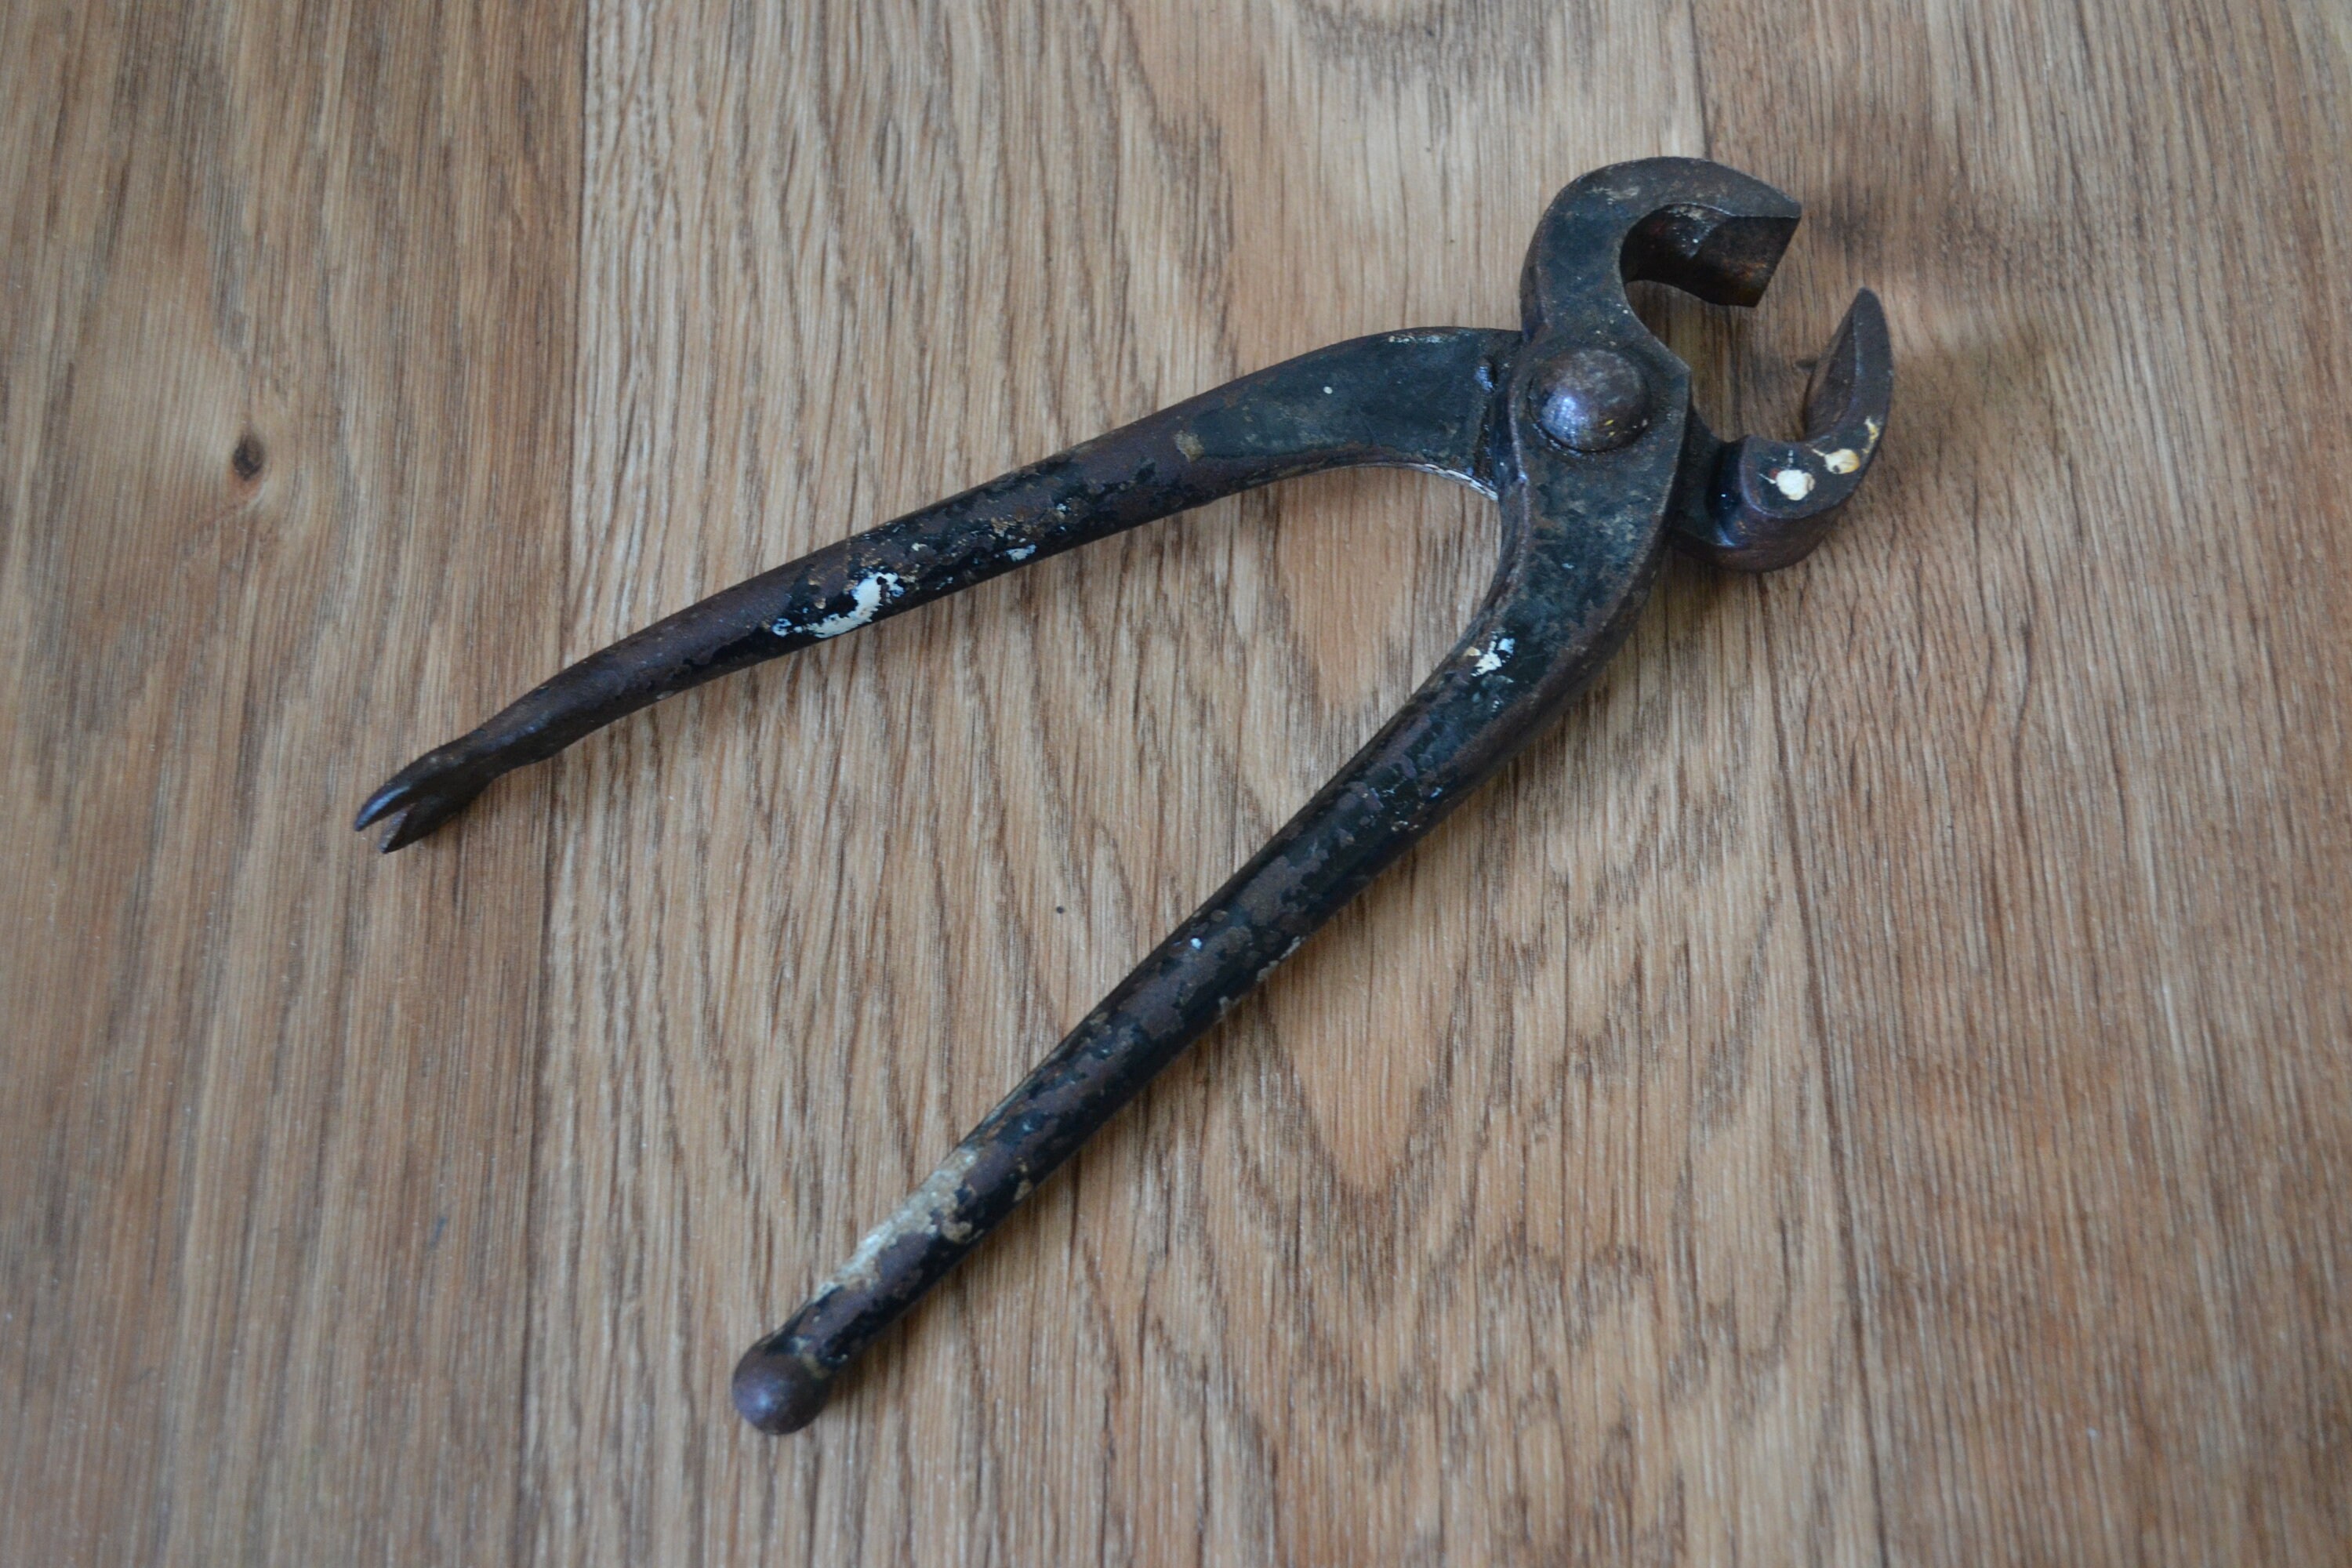 Reversible plyers  Old tools, Antique hand tools, Woodworking hand tools